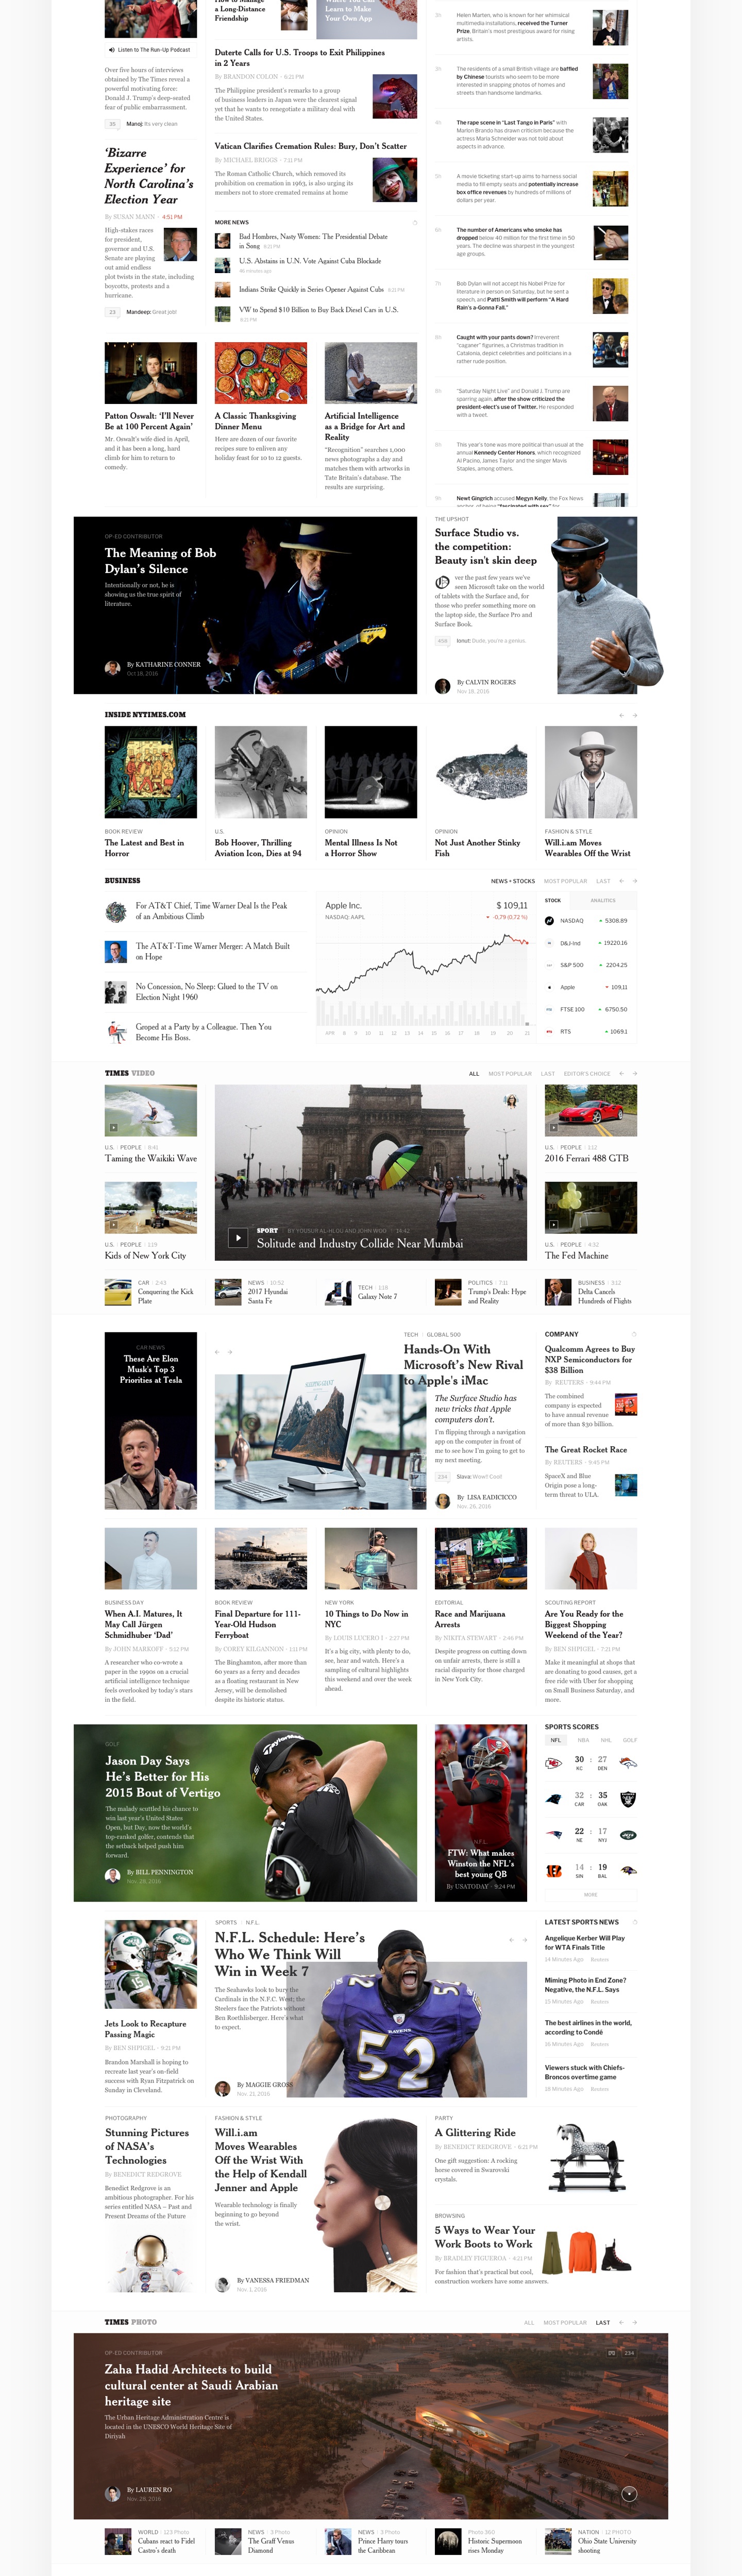 Editorial Design: The New York Times Redesign Concept